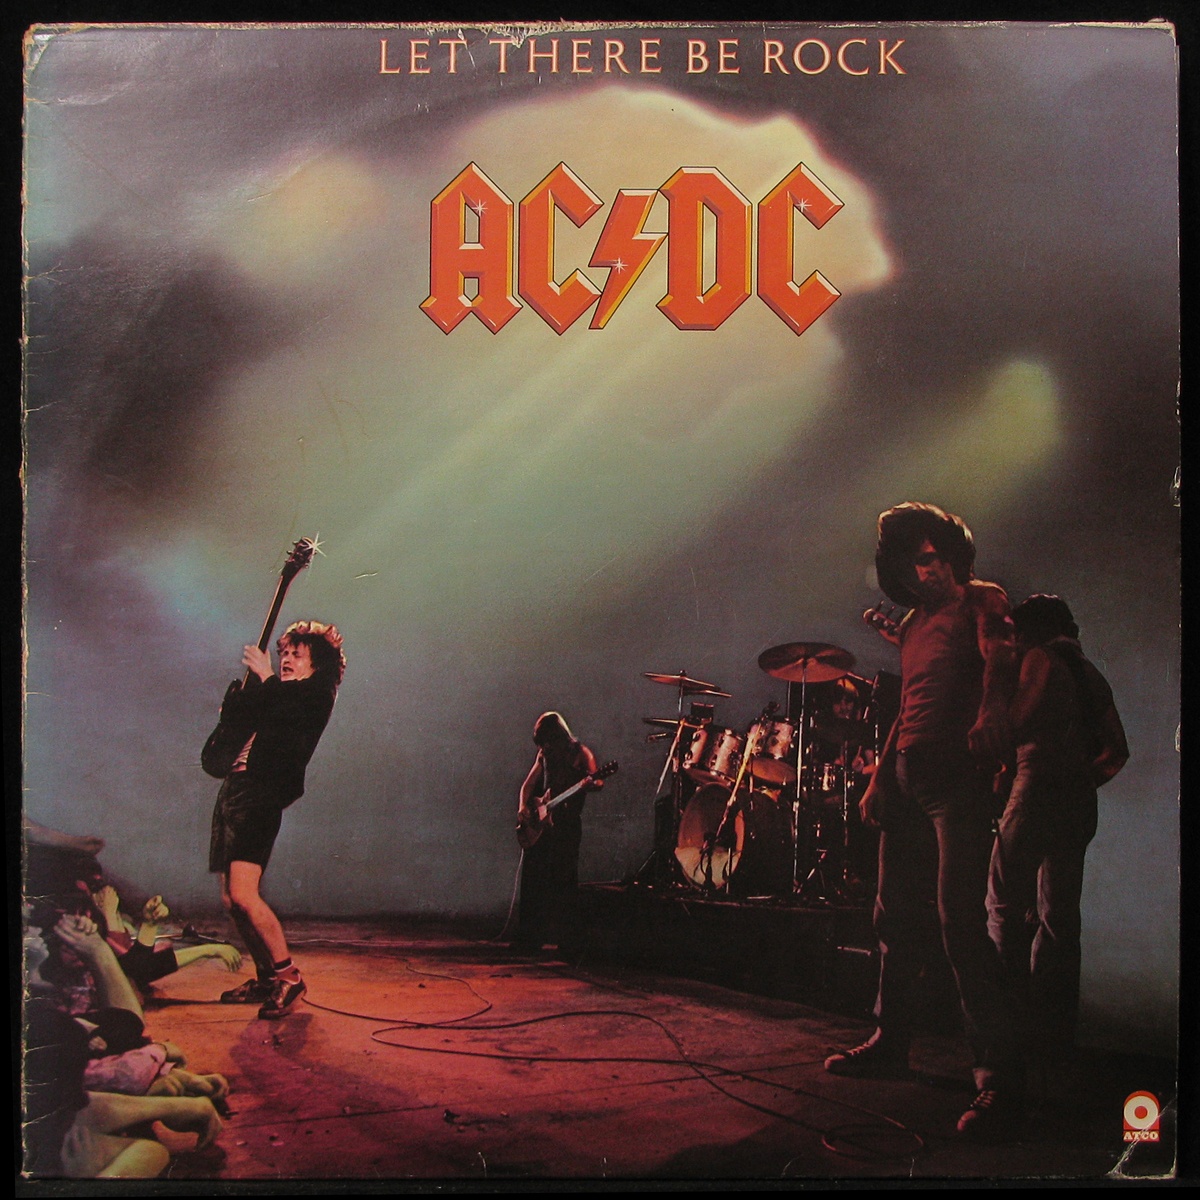 LP AC/DC — Let There Be Rock фото